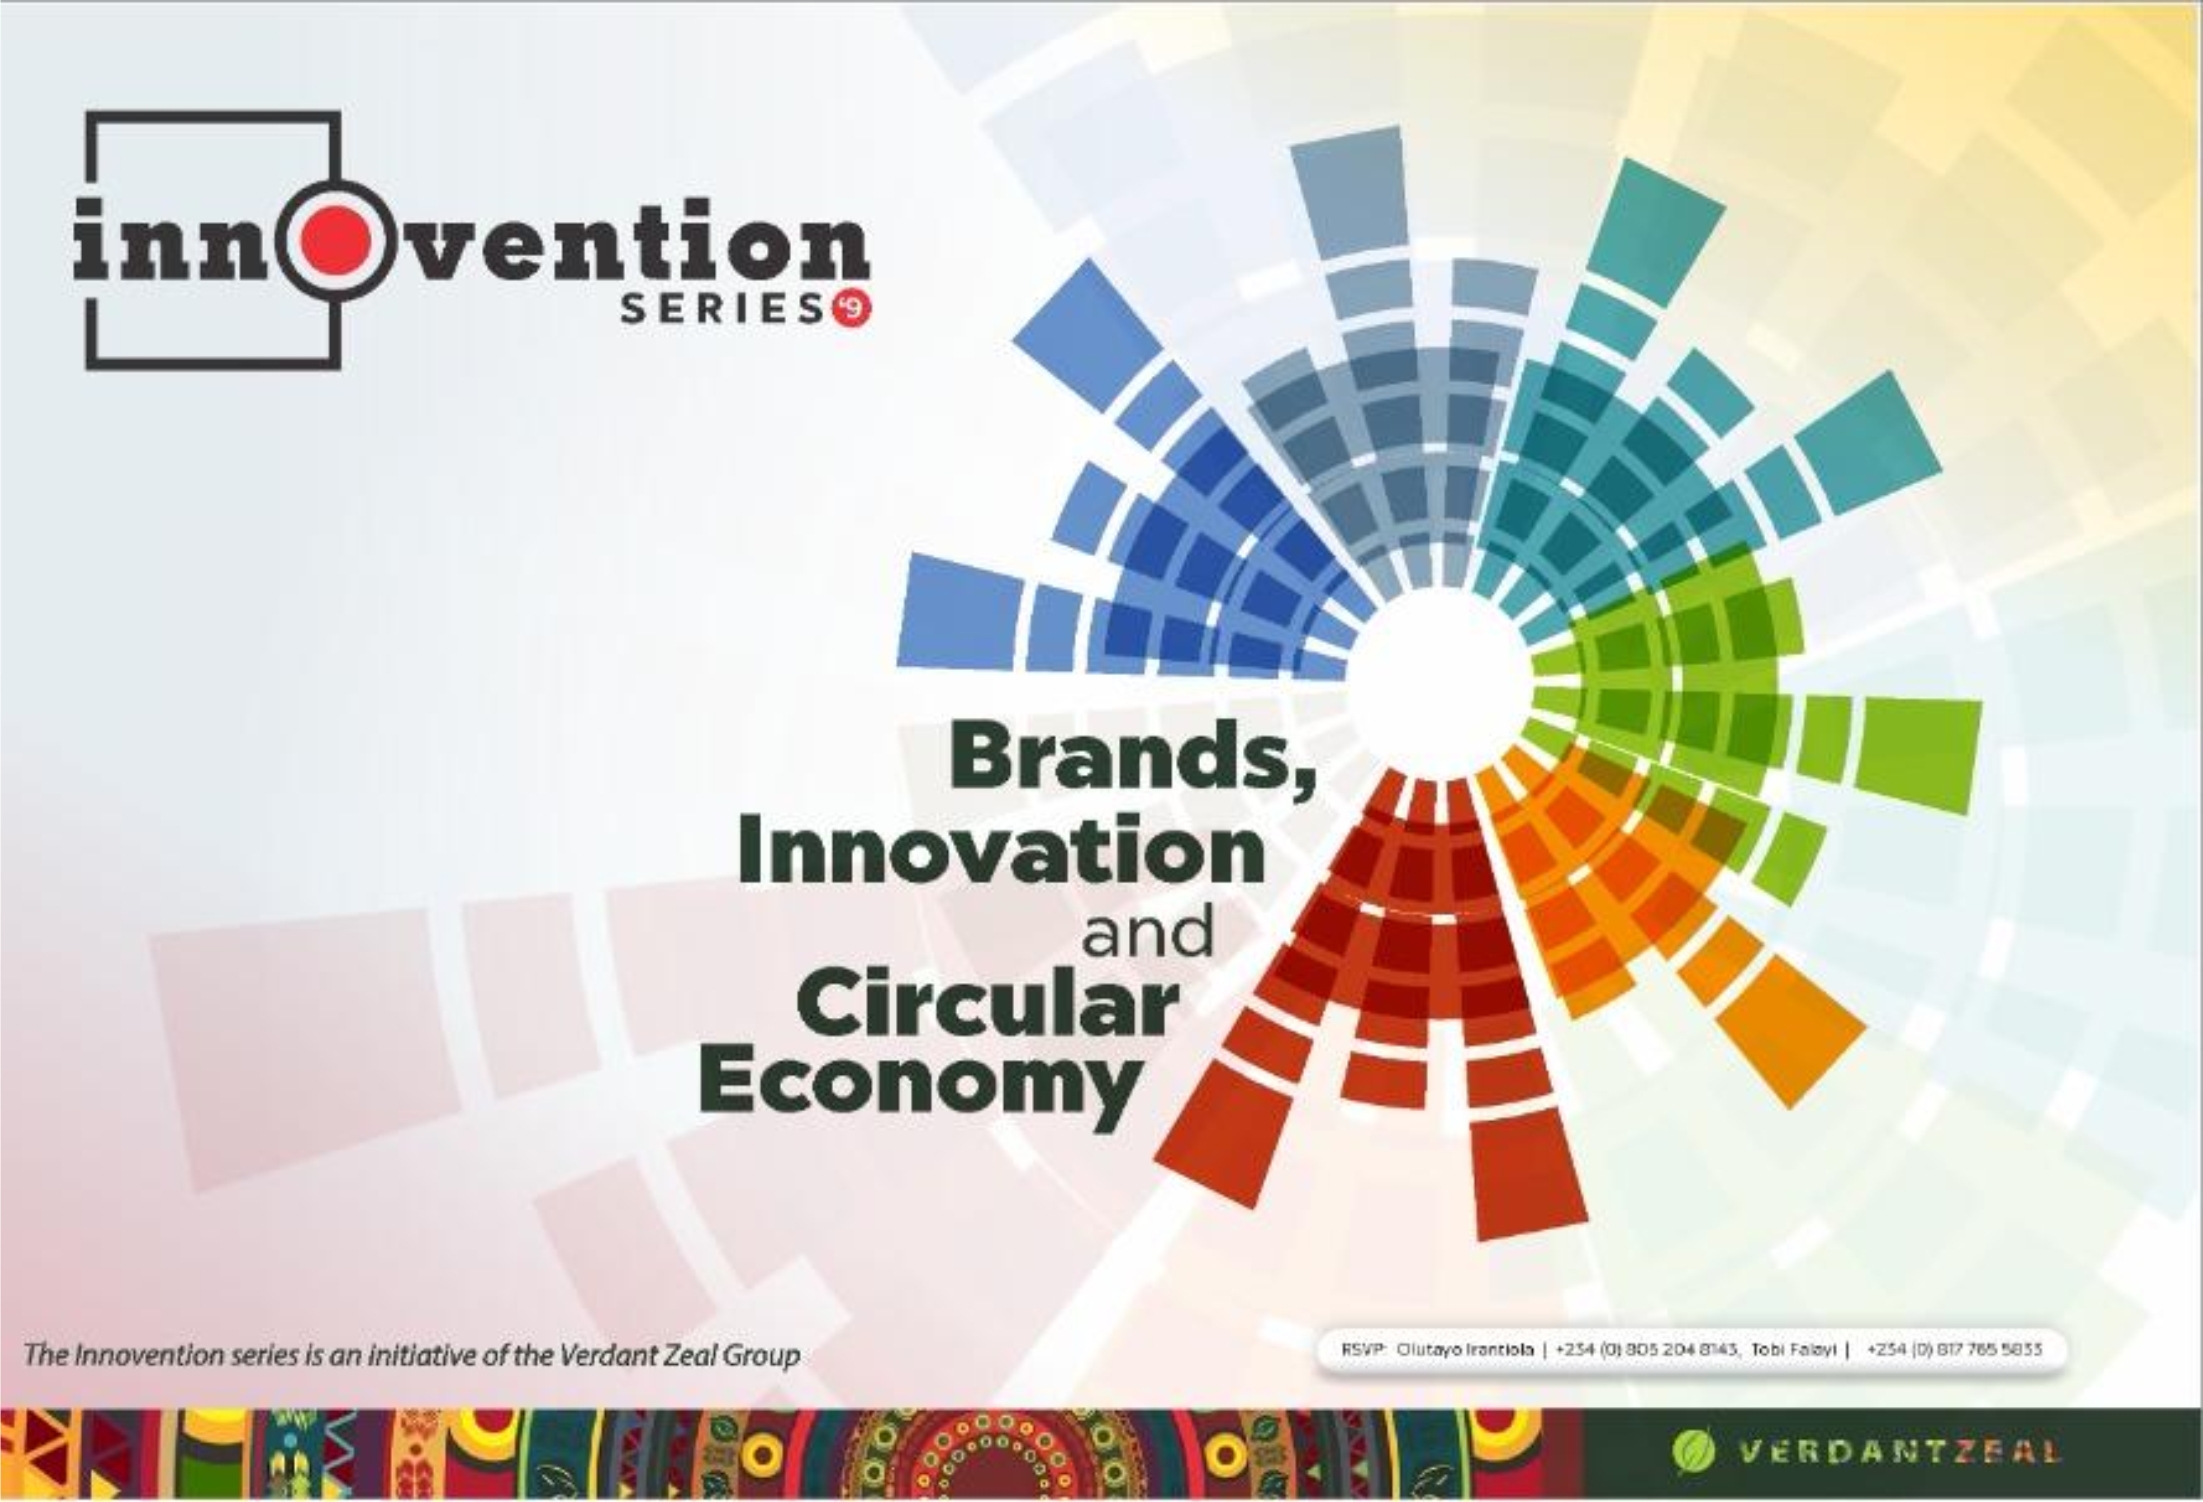 2021 Verdant Zeal ‘Innovention’ Series Sets Circular Economy On The Front Burner-marketingspace.com.ng